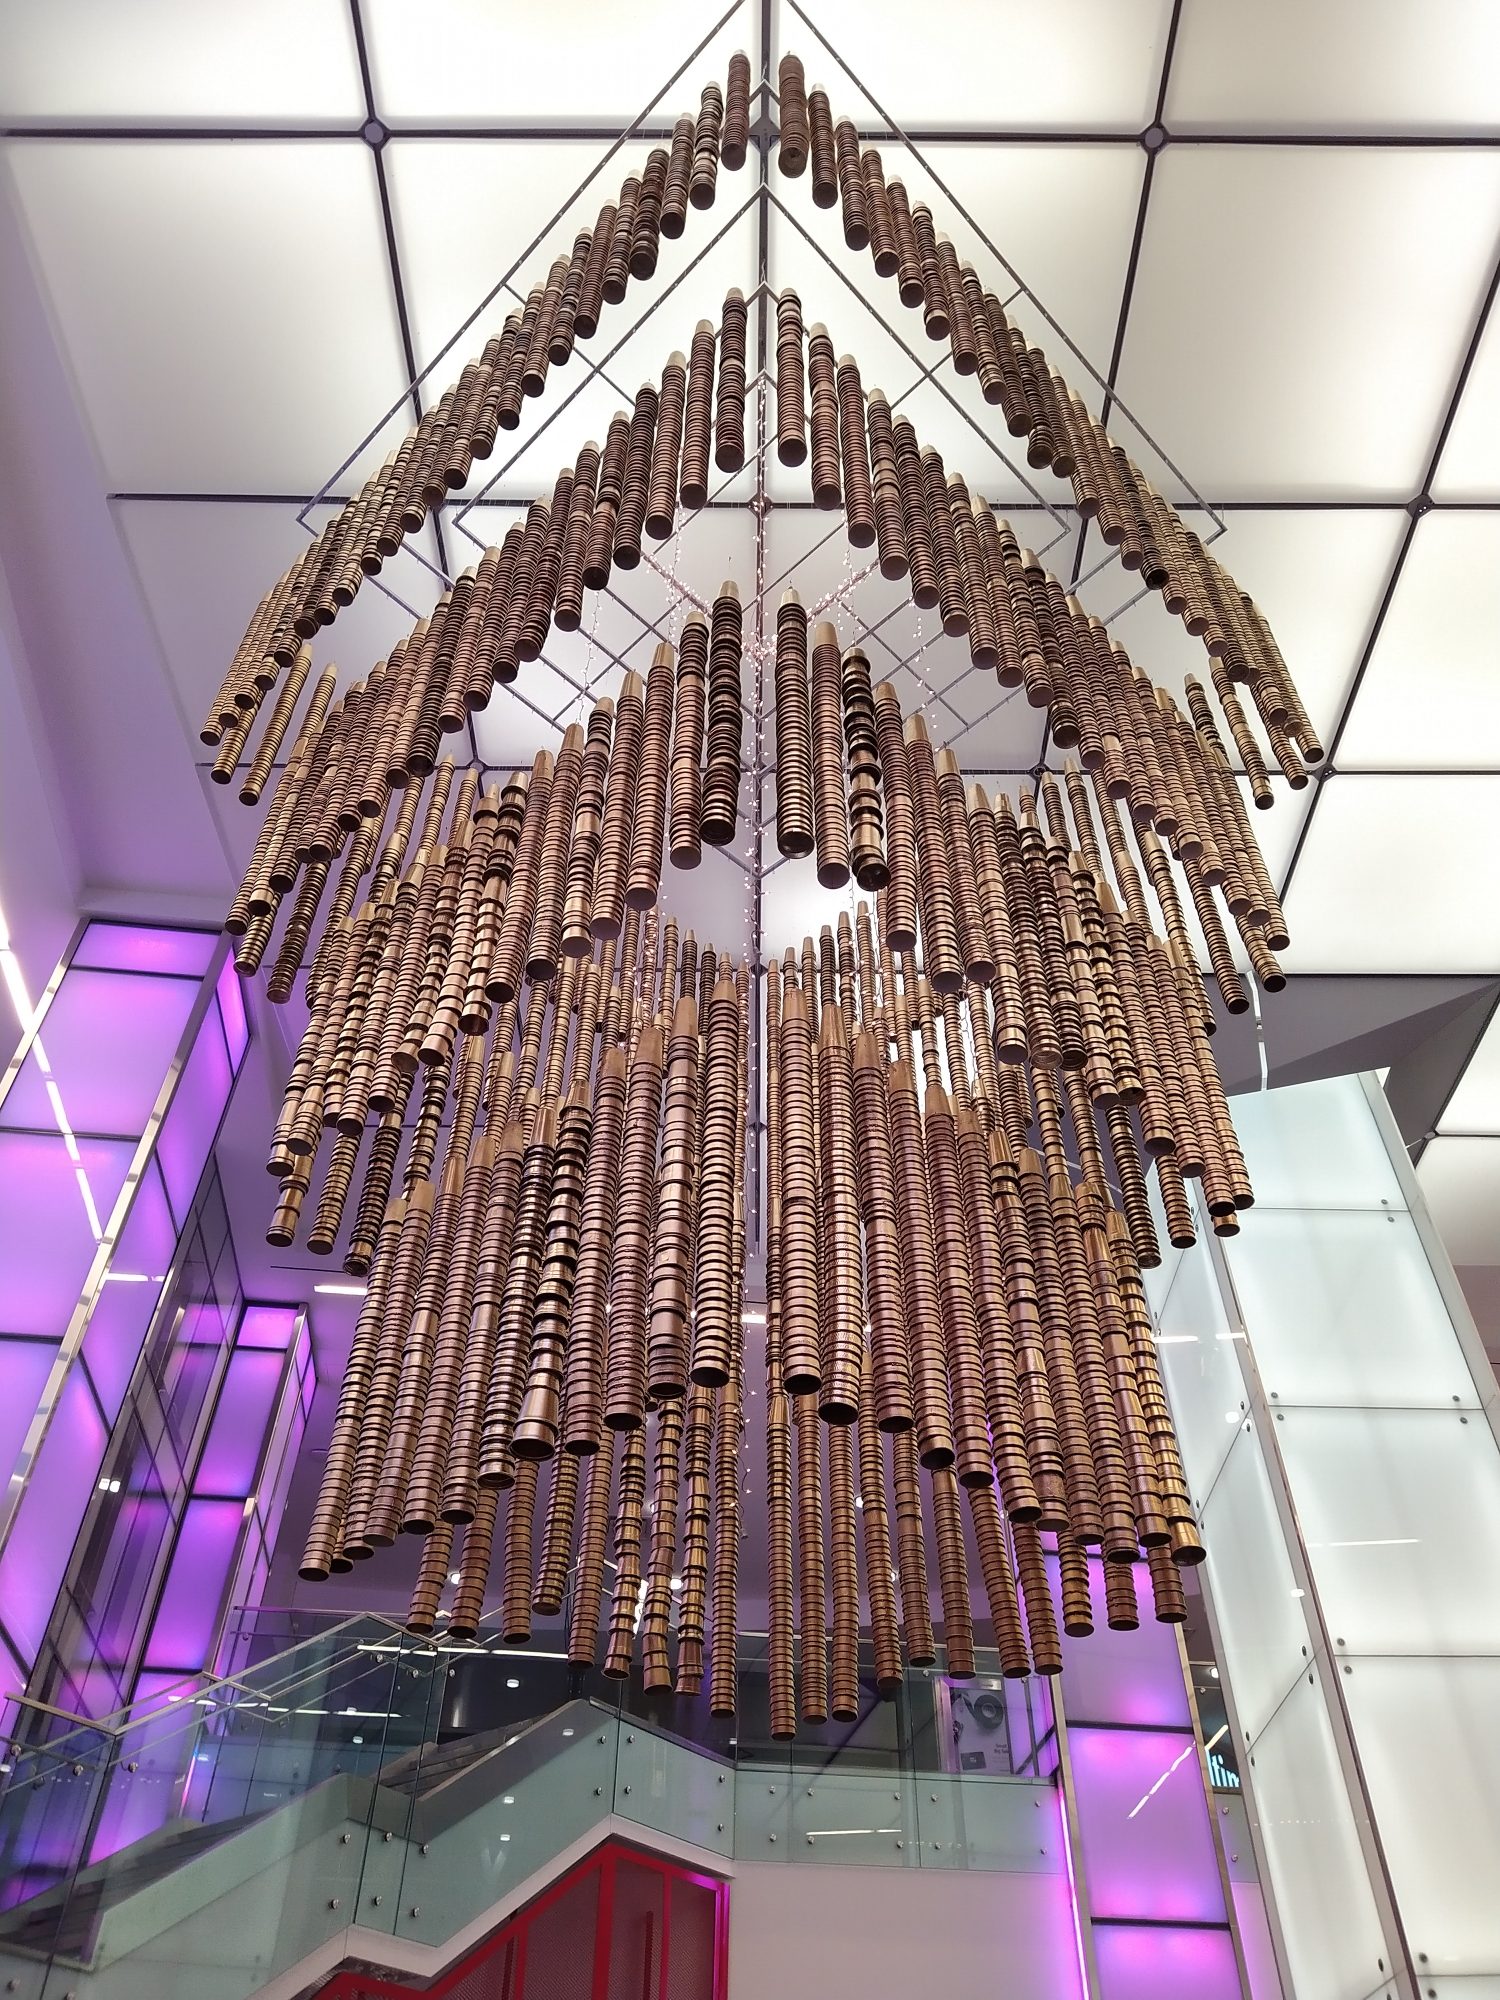 The Awakening, a huge waste-based sculpture, hangs from the ceiling in a mall's atrium. Resembling a chandelier, the "crystals" are made with discarded single-use cups made to look bronze.